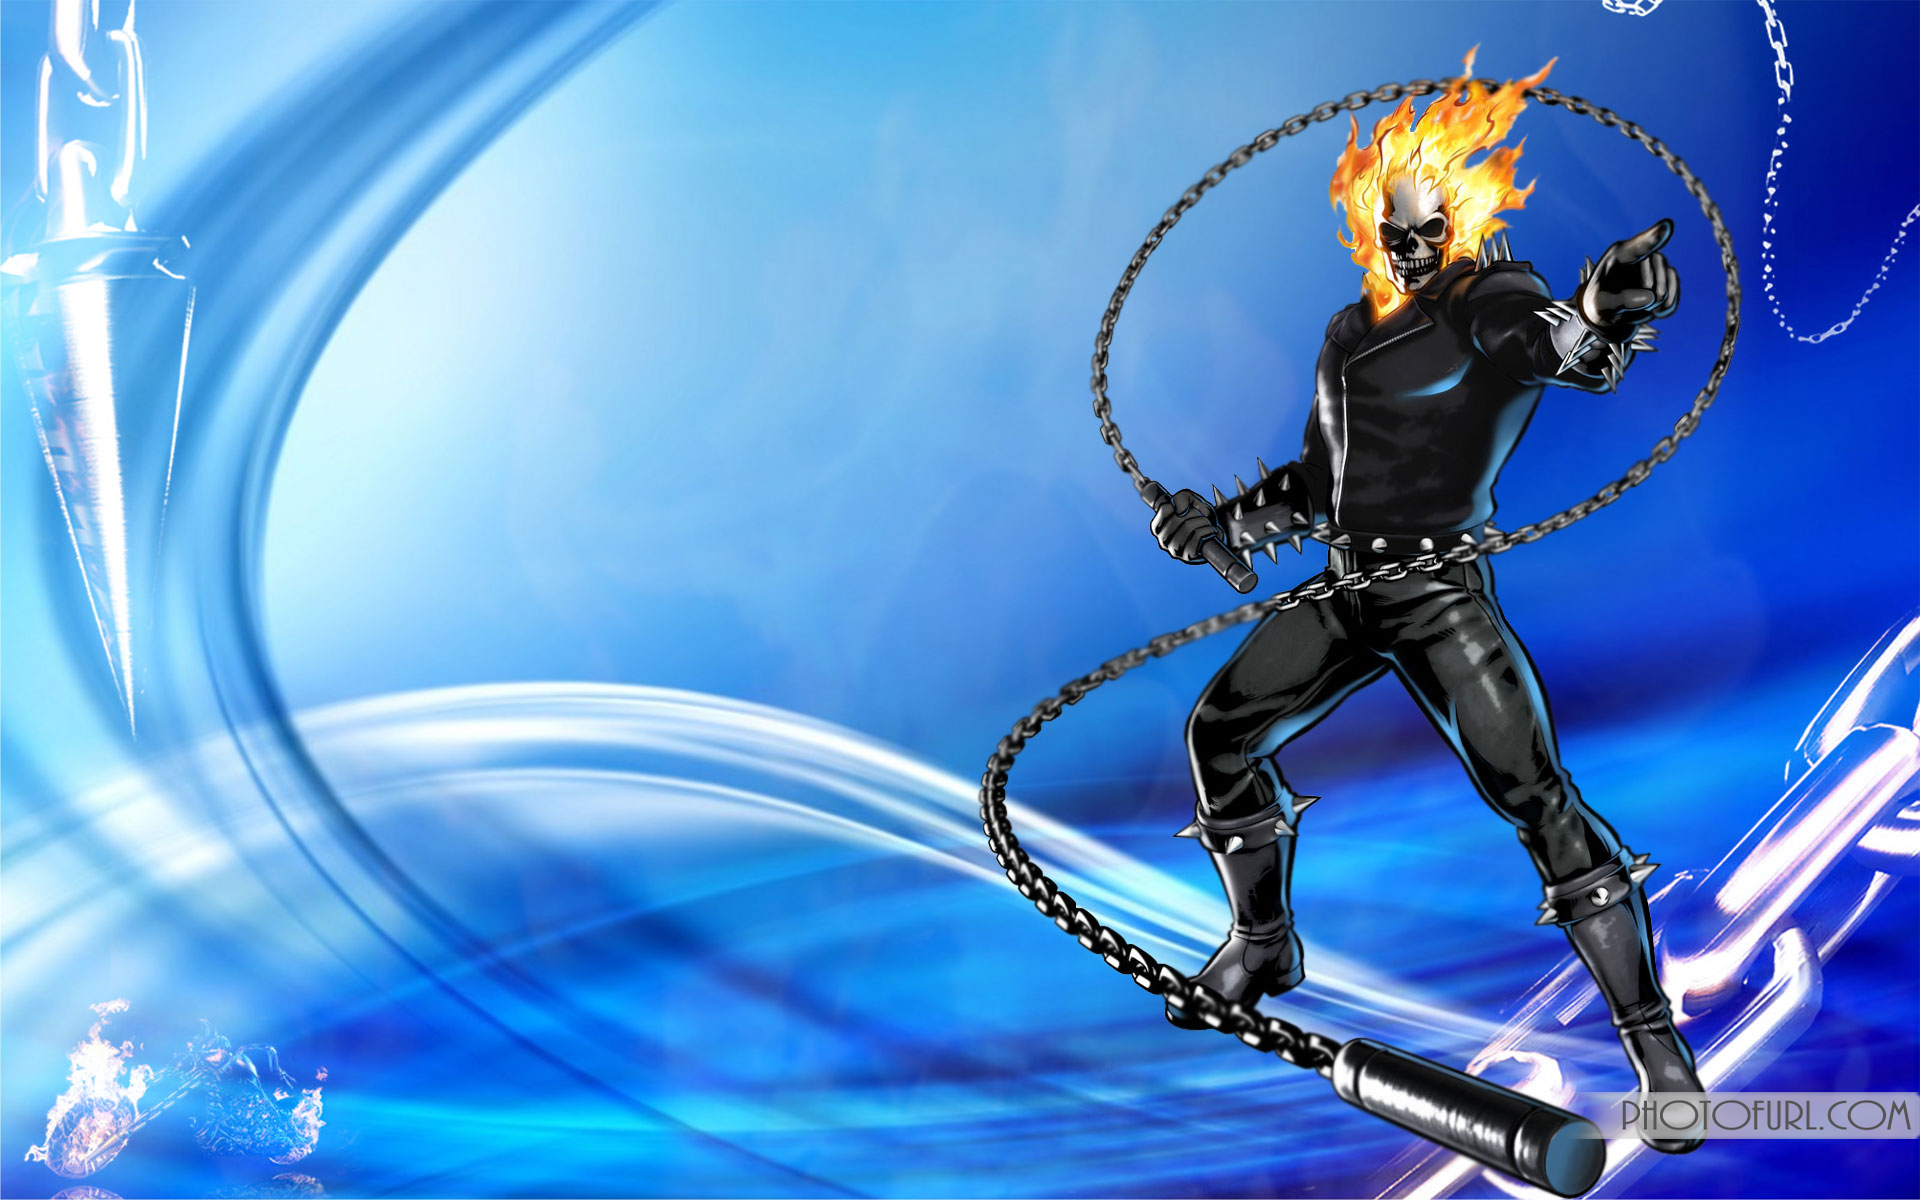 Wallpapers Ghost Rider Hd 1920x1200 | #675806 #ghost